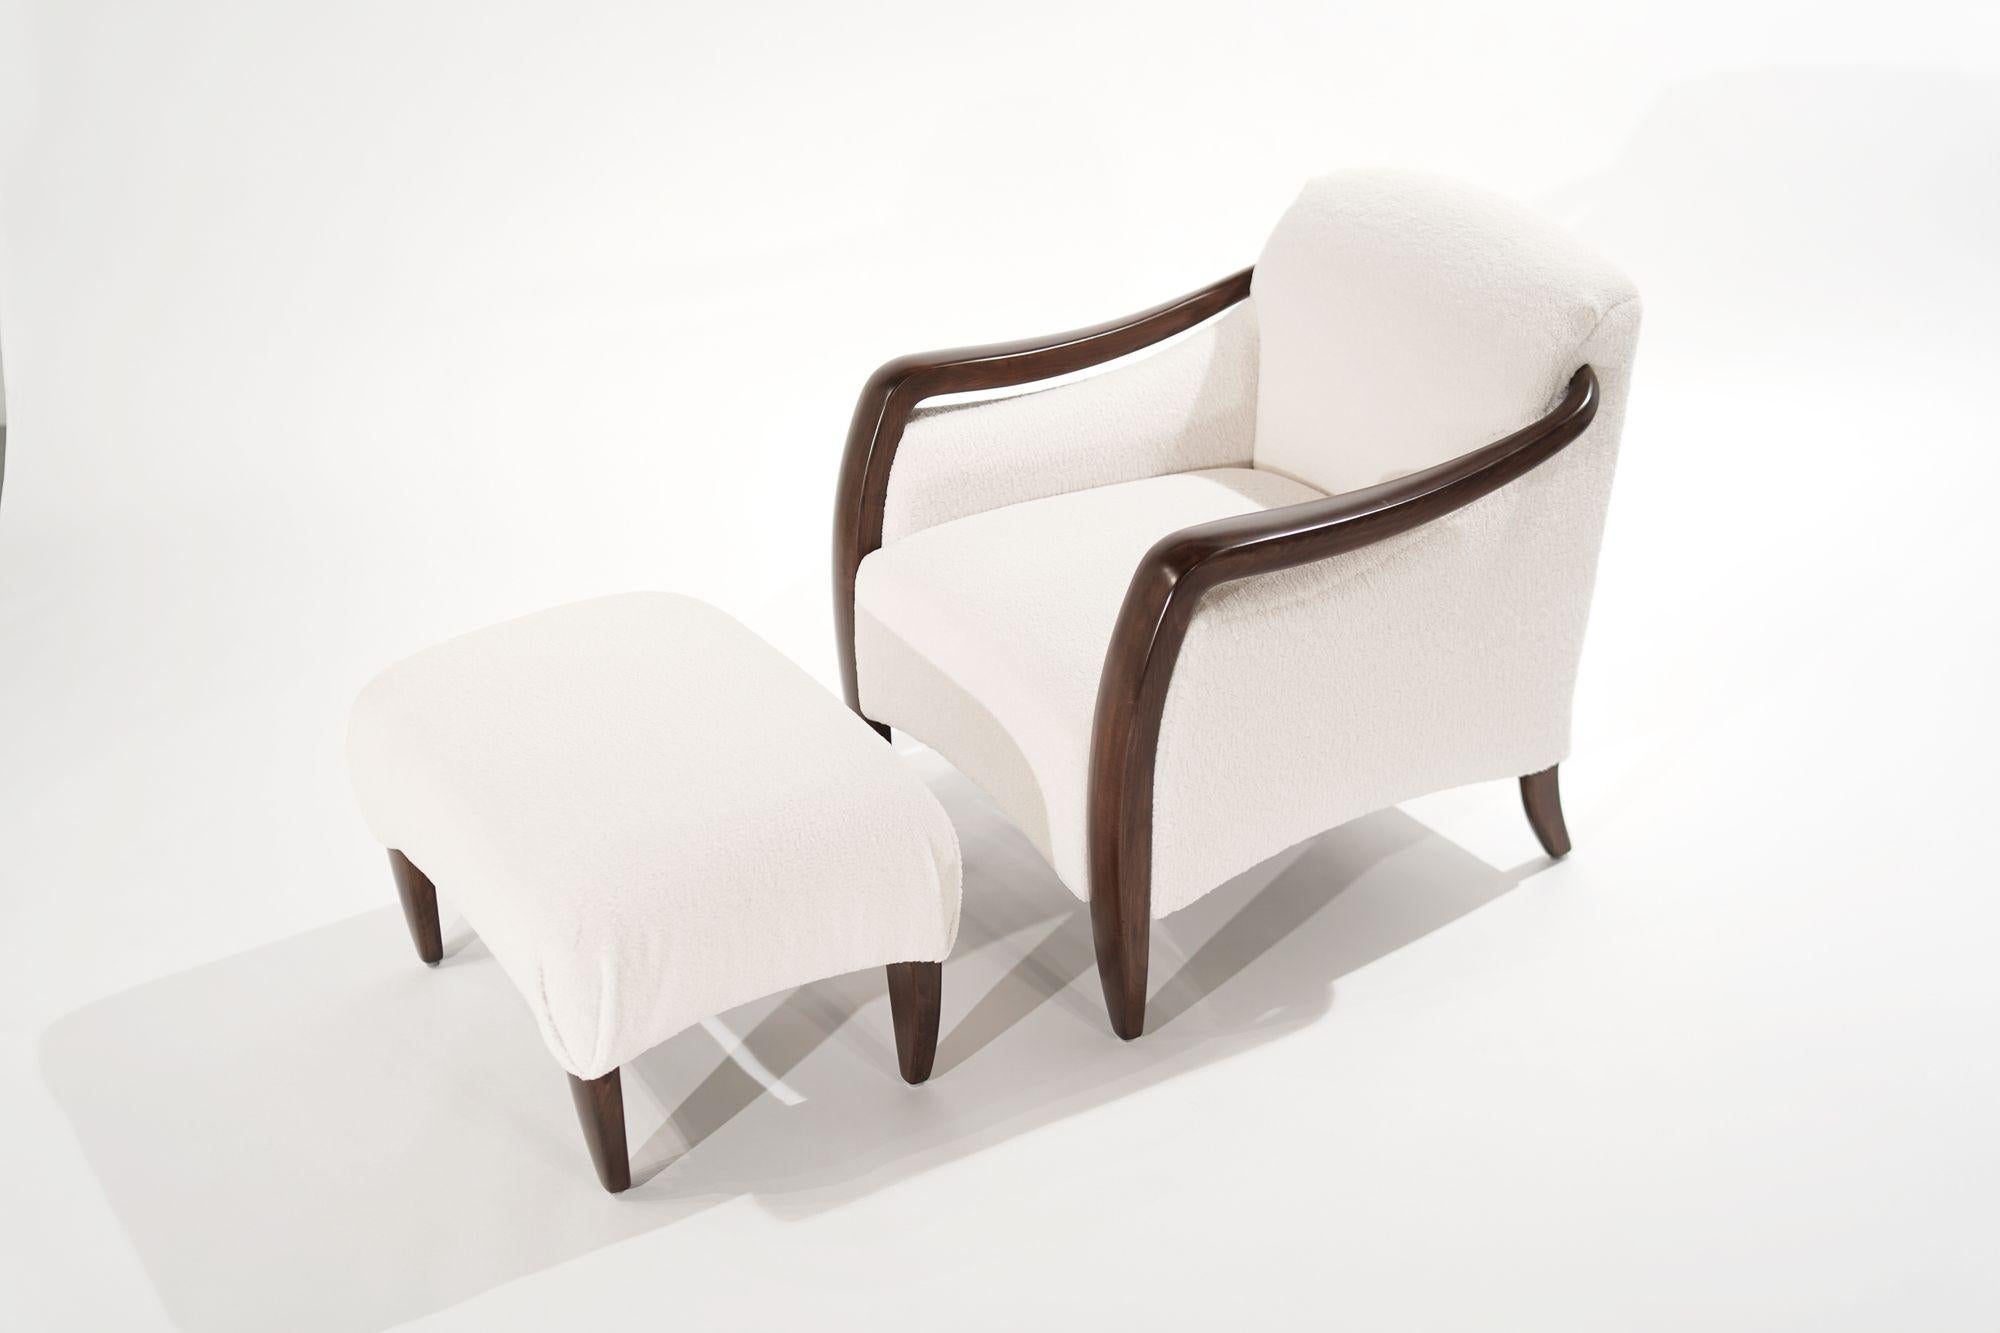 Stylish lounge chair and ottoman, circa 1970-1979. Features swooping framework with exposed walnut arms, reupholstered in off-white Italian boucle.
 
Ottoman Dimensions:
H: 17 in x W: 30 in x D: 20 in
 
Other designers working in the organic